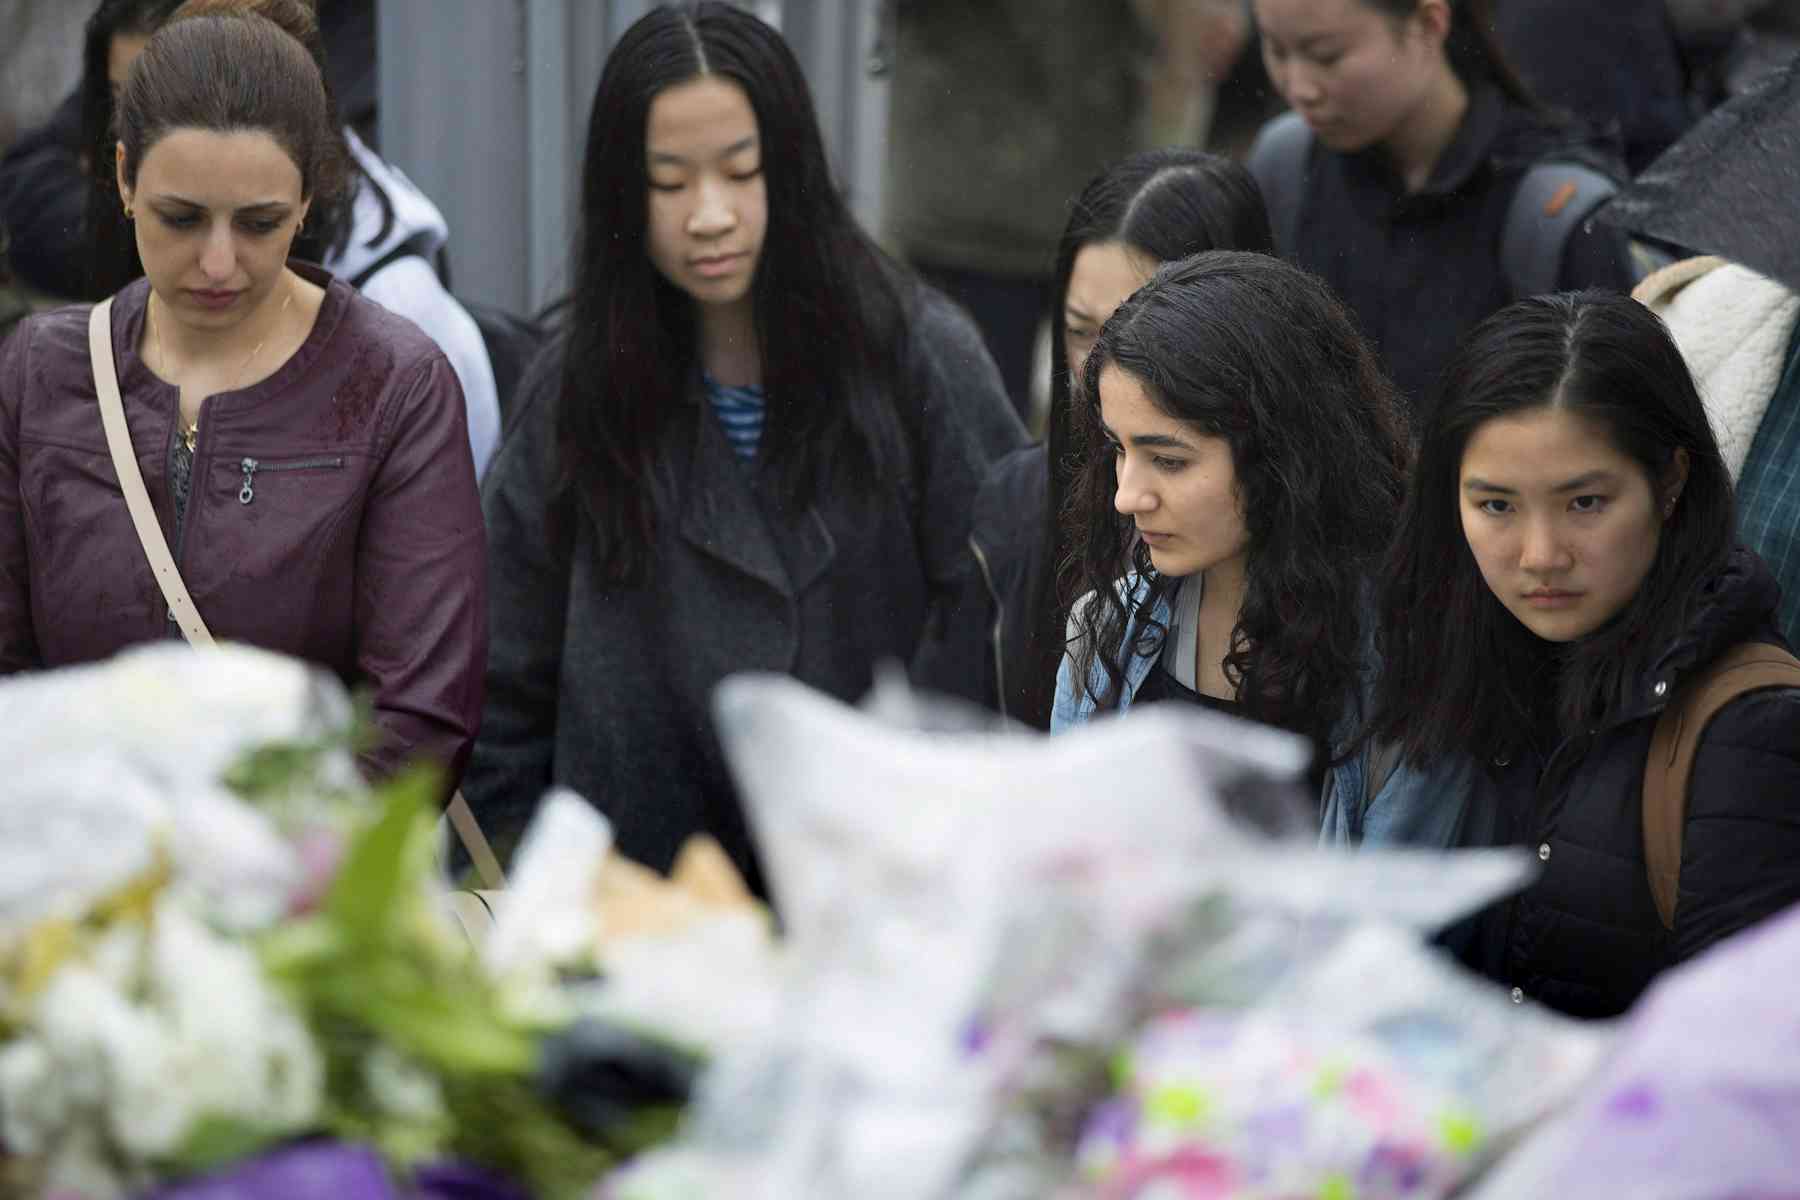 If misogyny was a factor, is Toronto rampage a terrorist act against women?